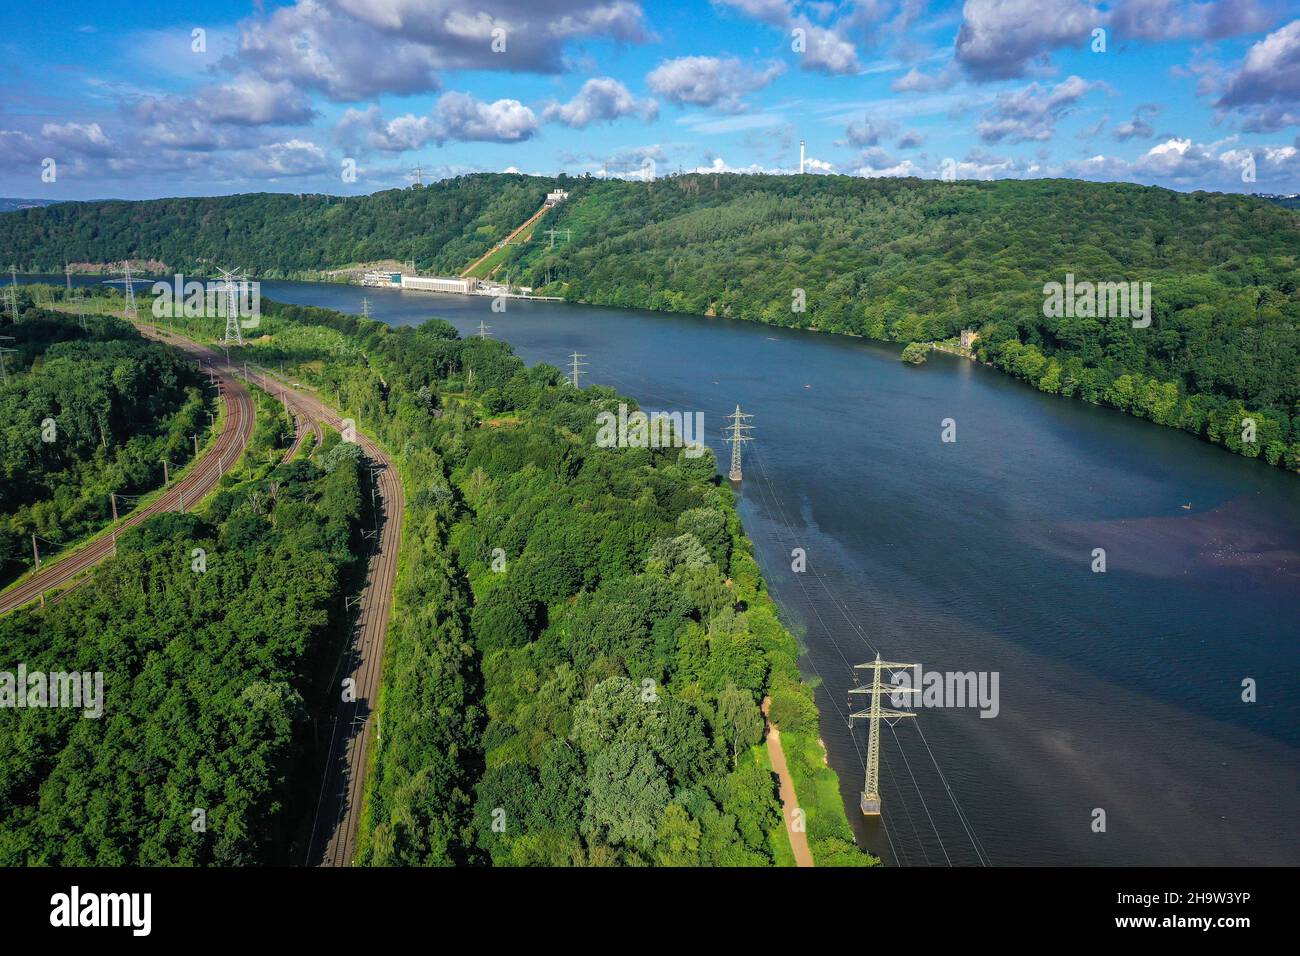 '29.07.2021, Germany, North Rhine-Westphalia, Hagen - Lake Hengstey is a reservoir completed in 1929 and operated by the Ruhr Association in the cours Stock Photo